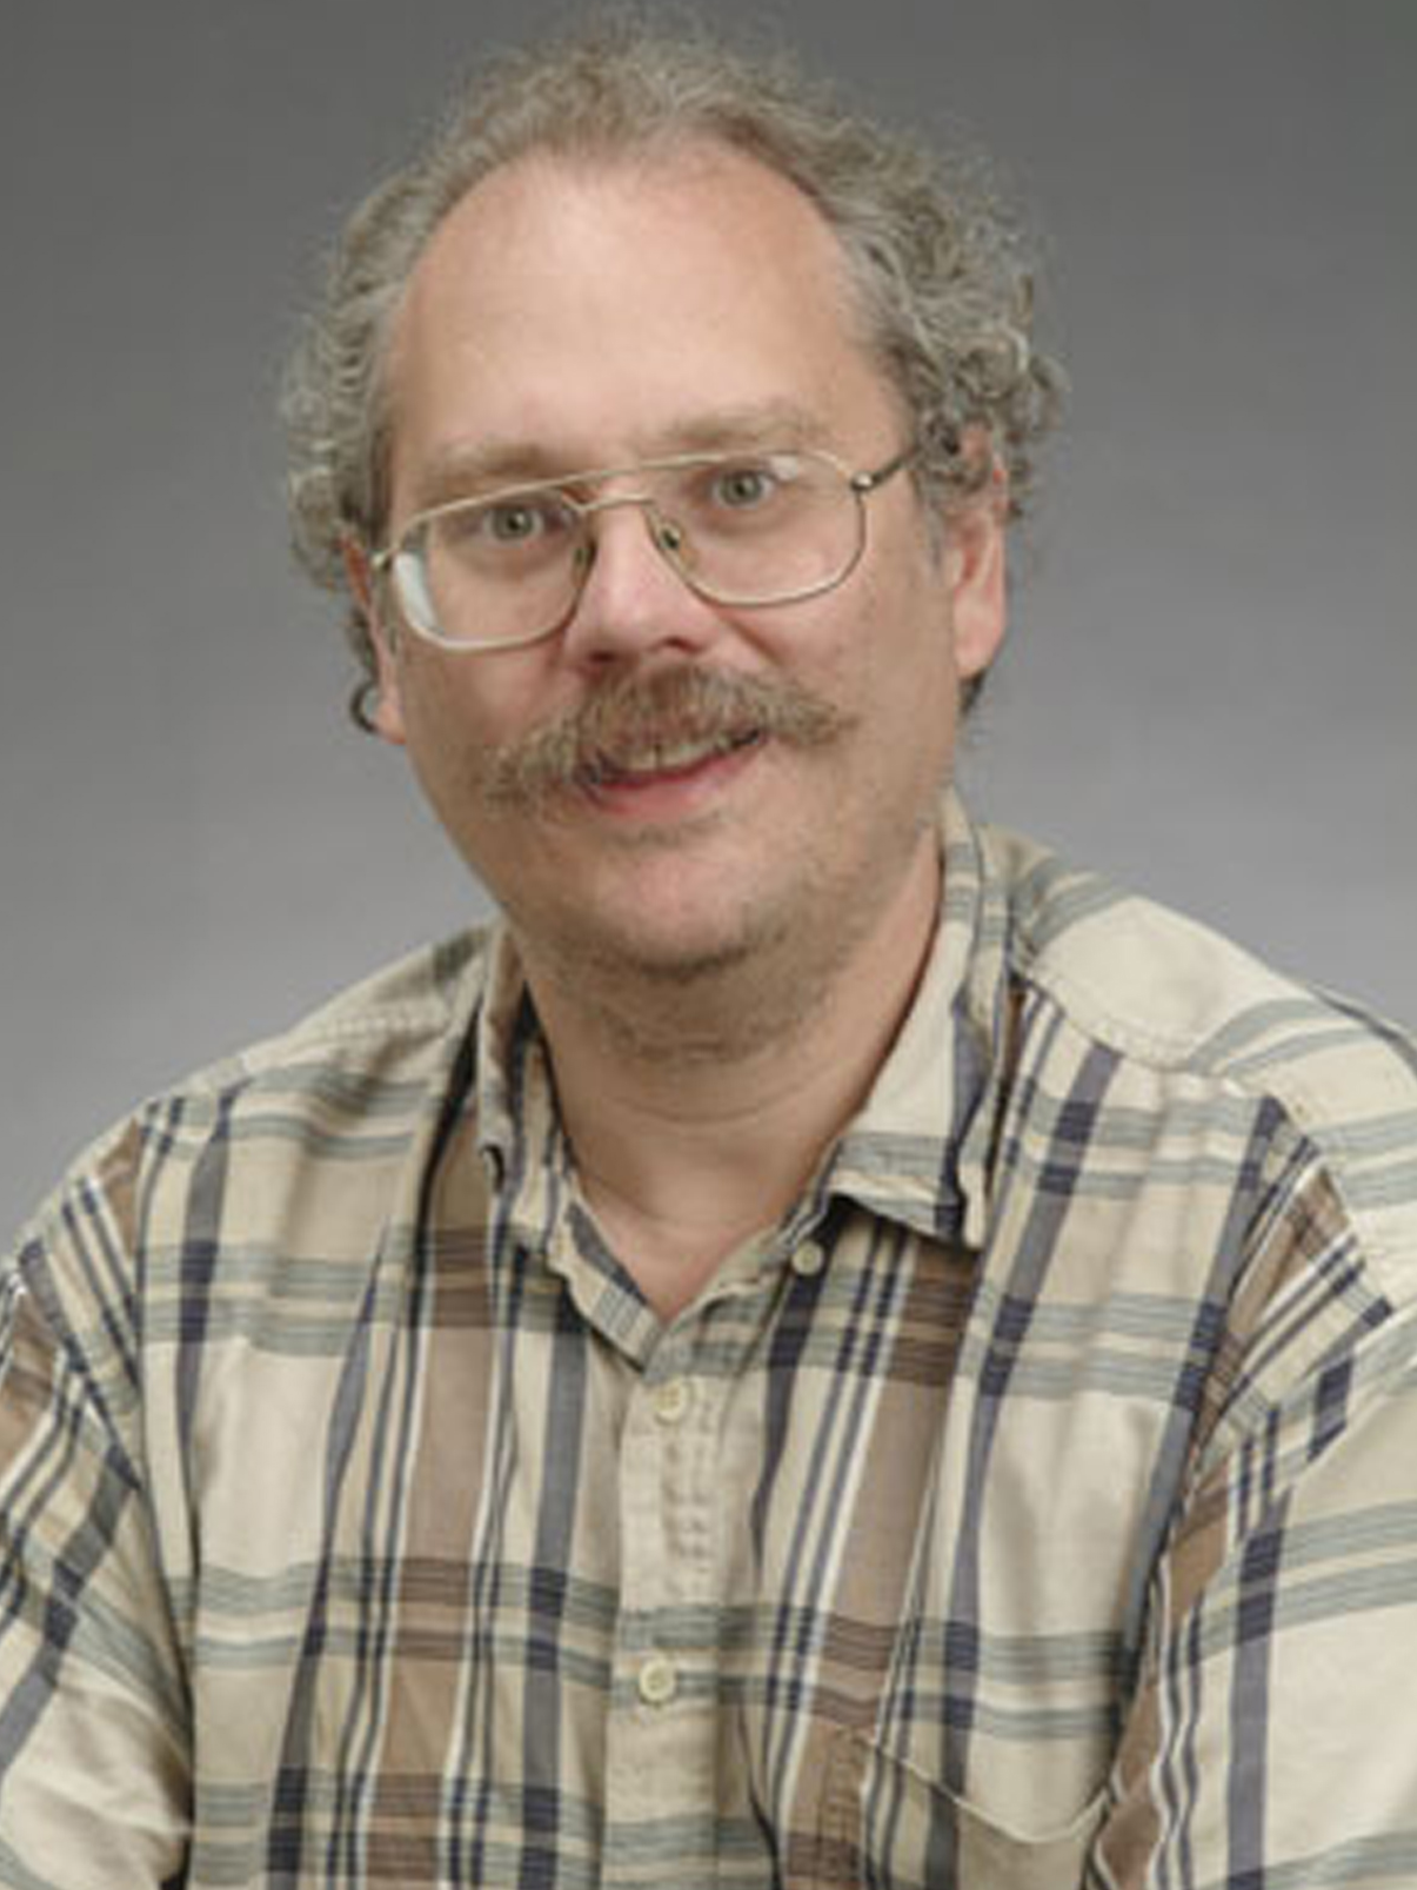 Peter Shor, Morss Professor of Applied Mathematics at MIT, Distinguishes Visiting Research Chair at Perimeter